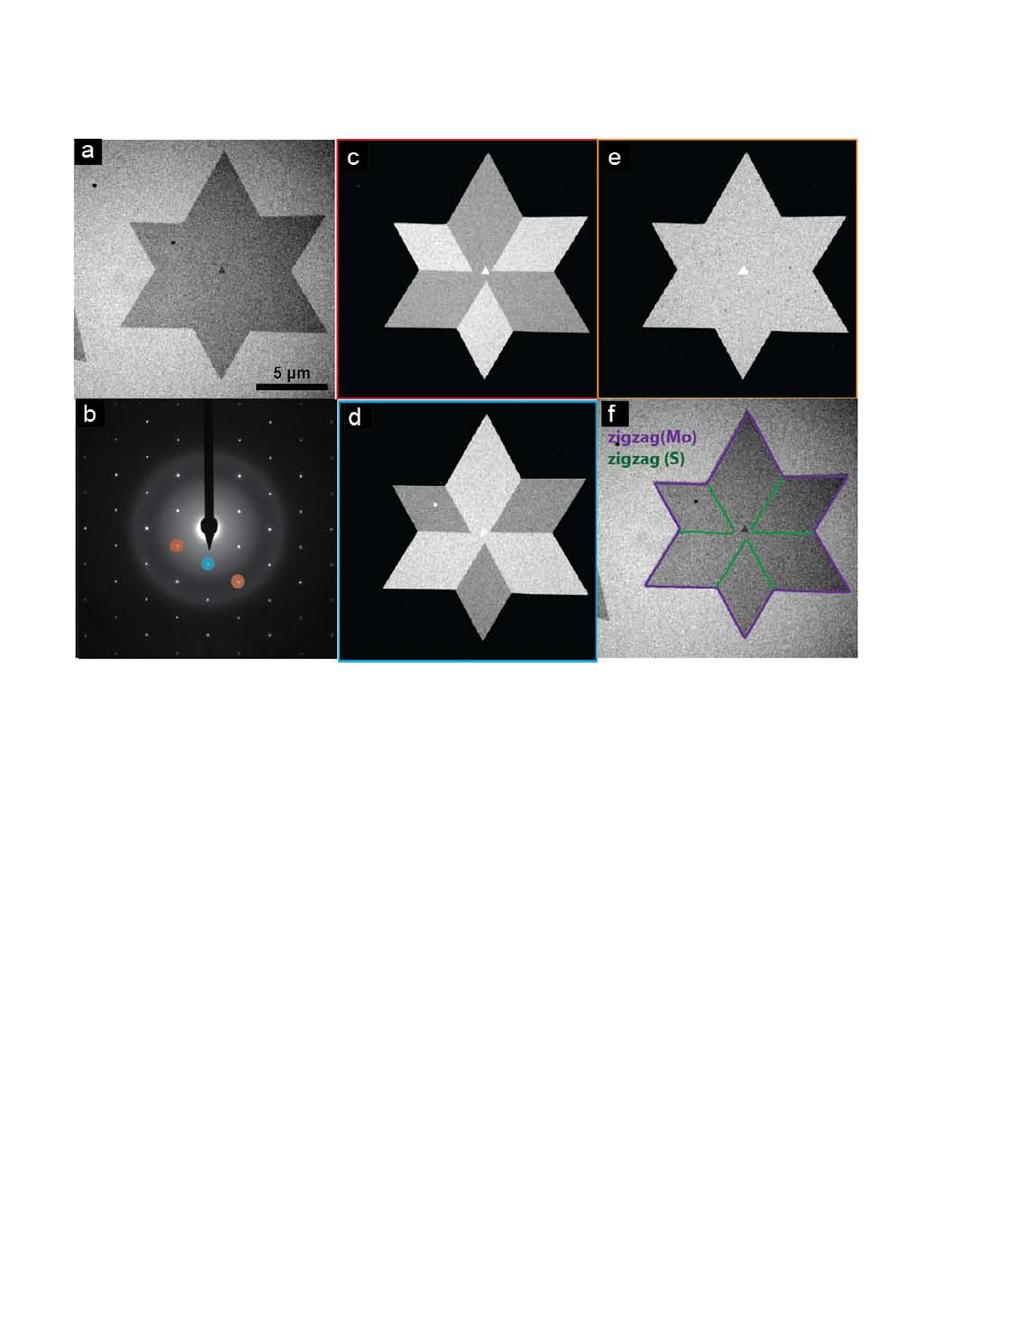 Supplementary Figure S5: DF-TEM imaging of cyclic twin a) Bright- field image of a 6- pointed star. b) Full diffraction pattern shows star has no rotational boundaries.